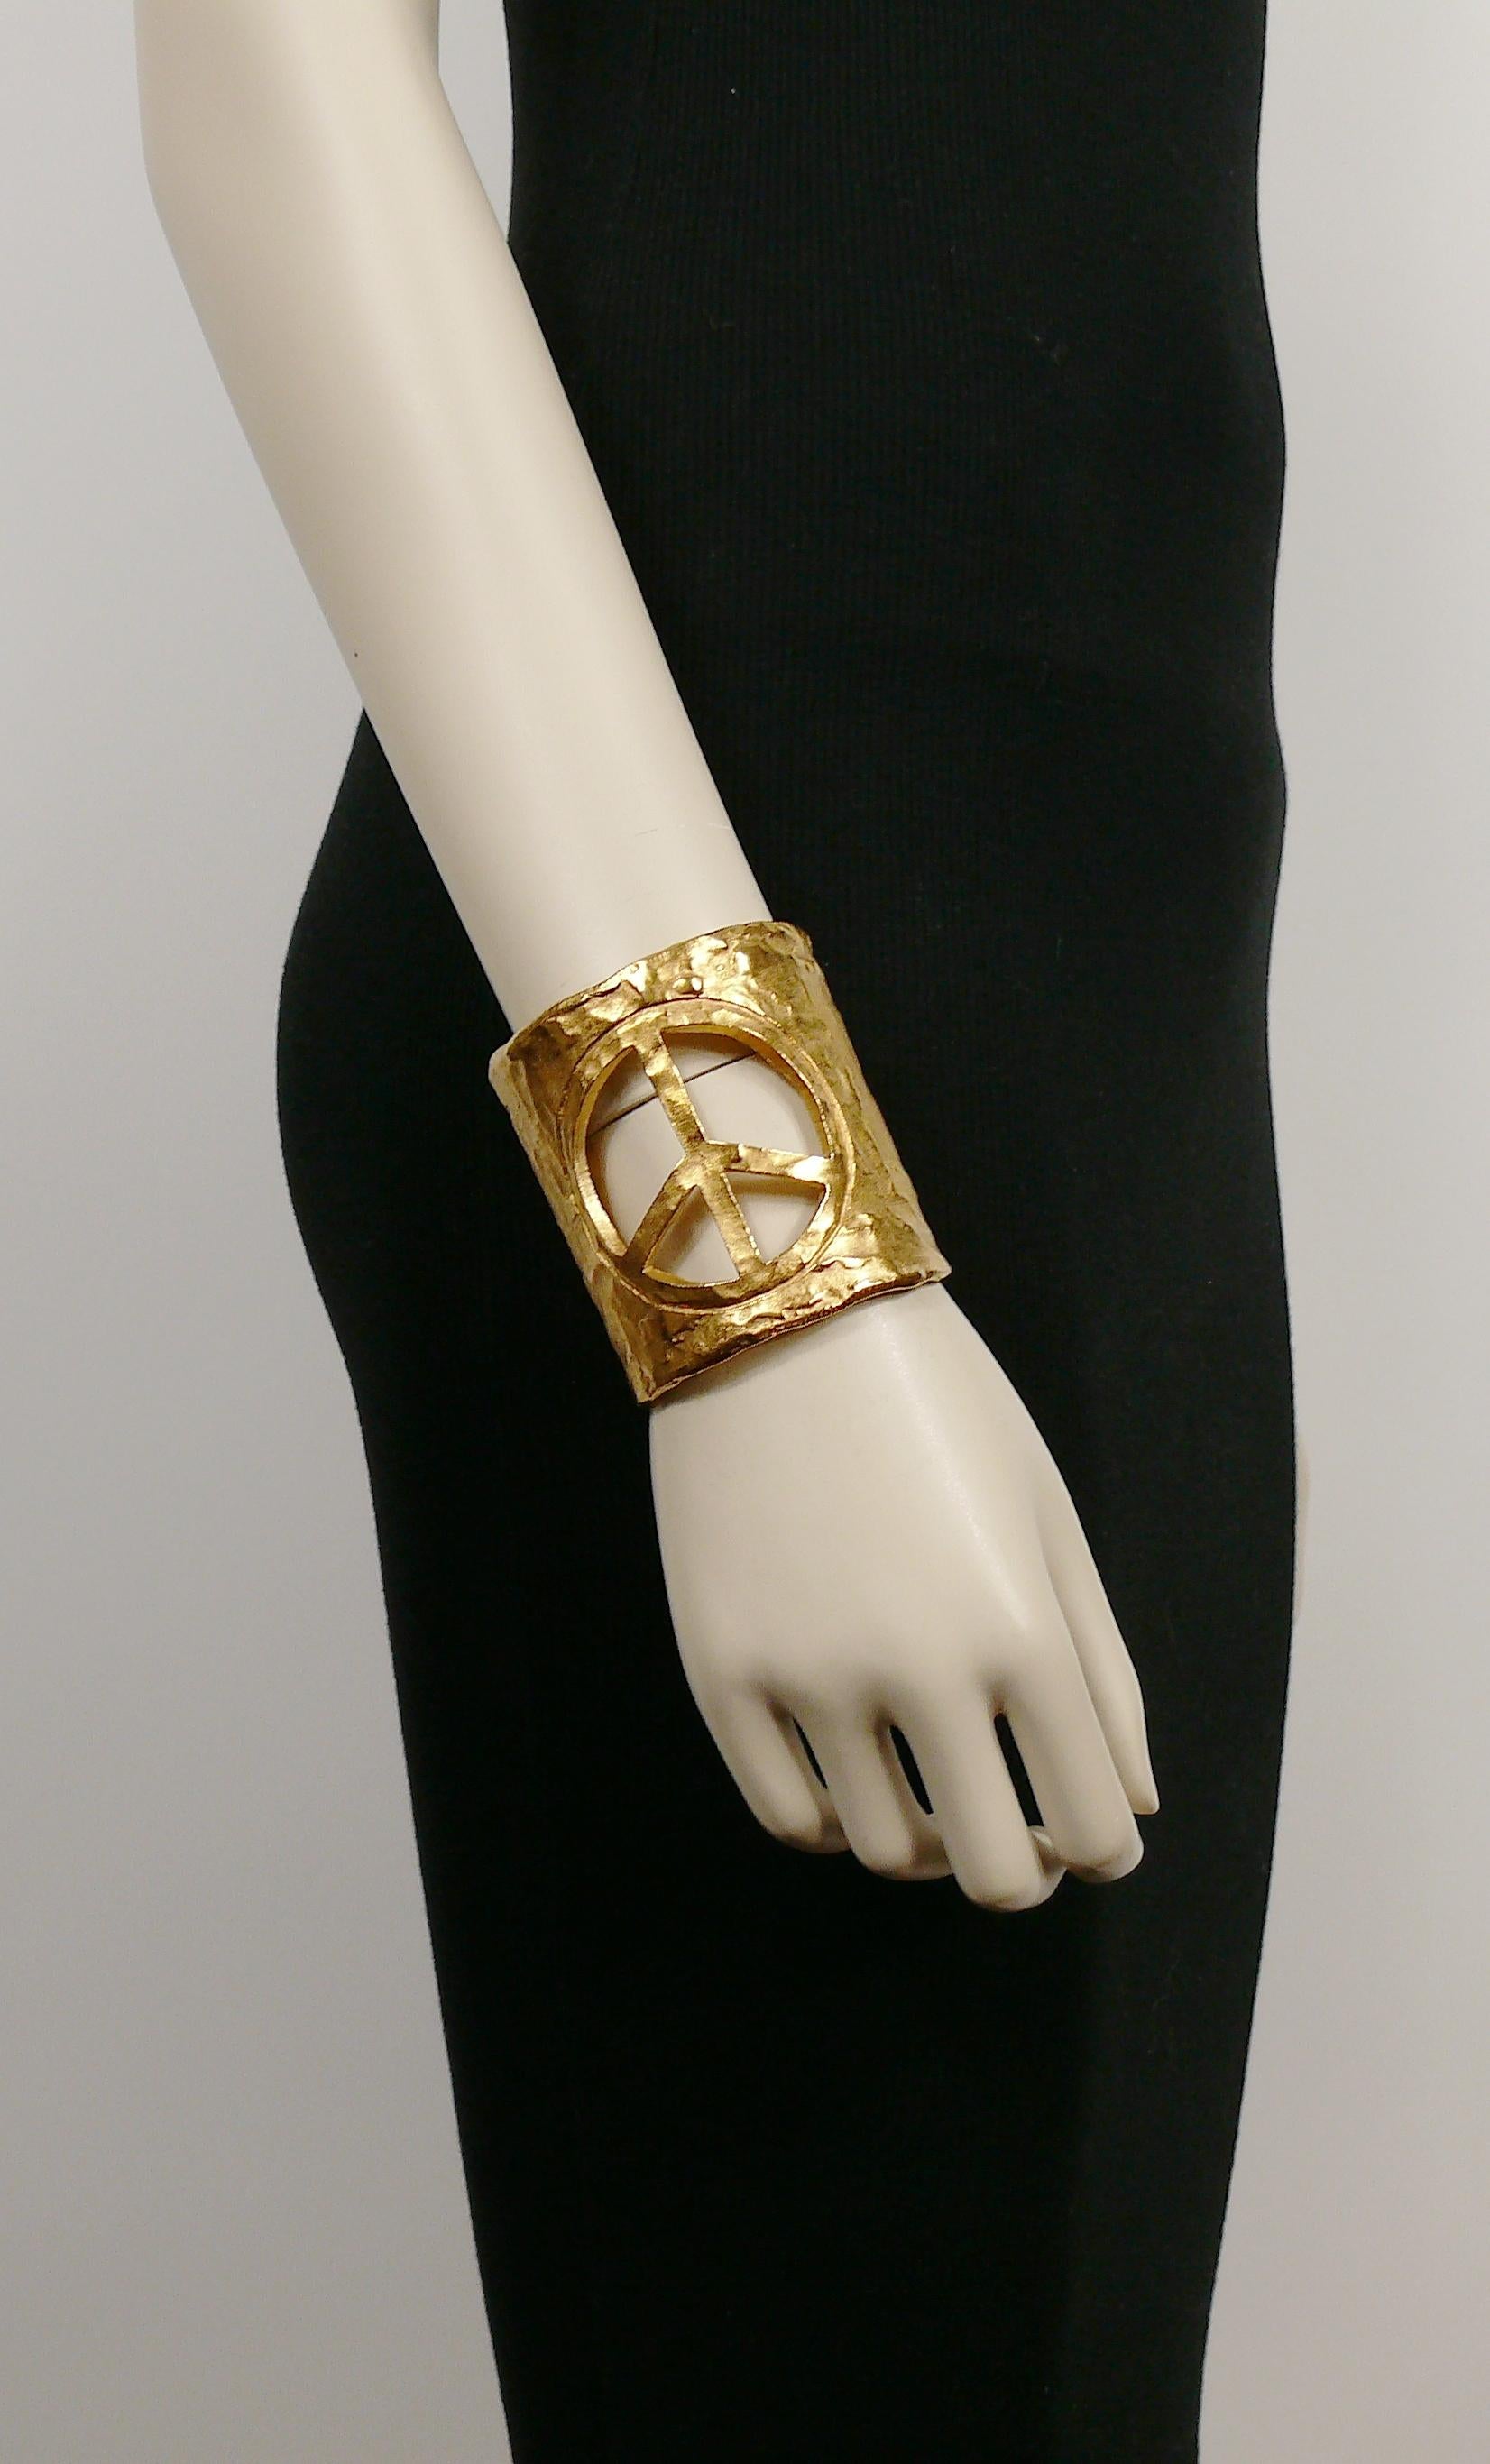 BICHE DE BERE vintage gold toned textured cuff bracelet featuring a cut-out peace sign.

Embossed 48/53.
Unmarked.

Indicative measurements : inner circumference approx. 17.91 cm (7.05 cm) / width approx. 7.1 cm (2.80 inches).

Comes with original